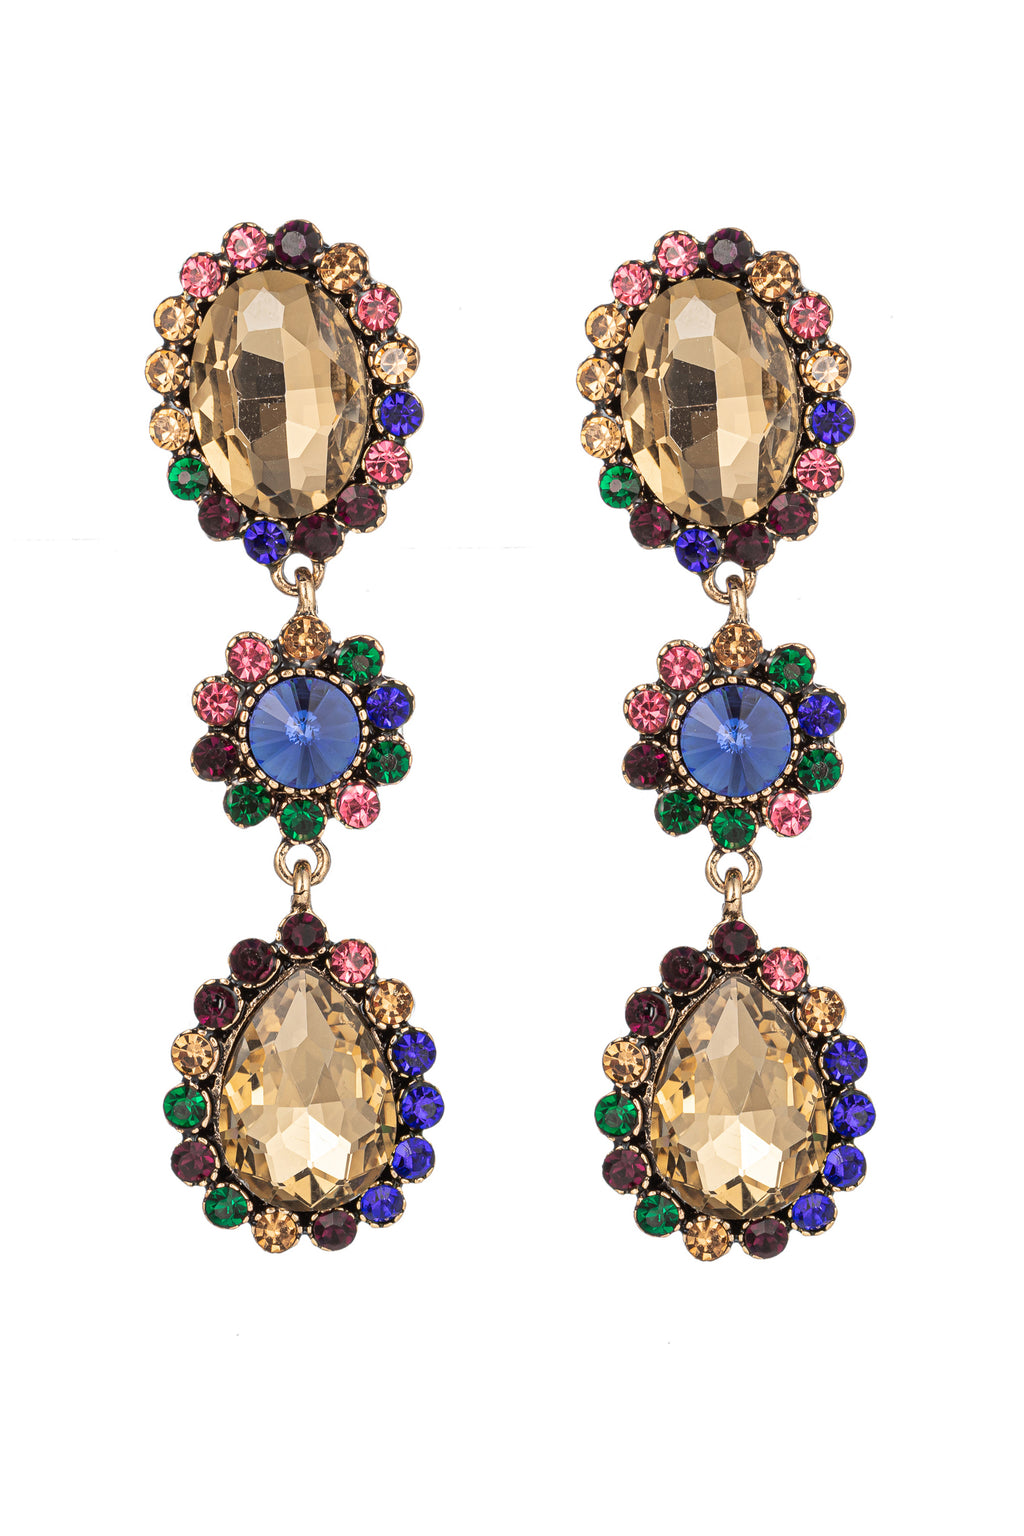 Gold tone alloy cascade statement earrings studded with glass crystals.